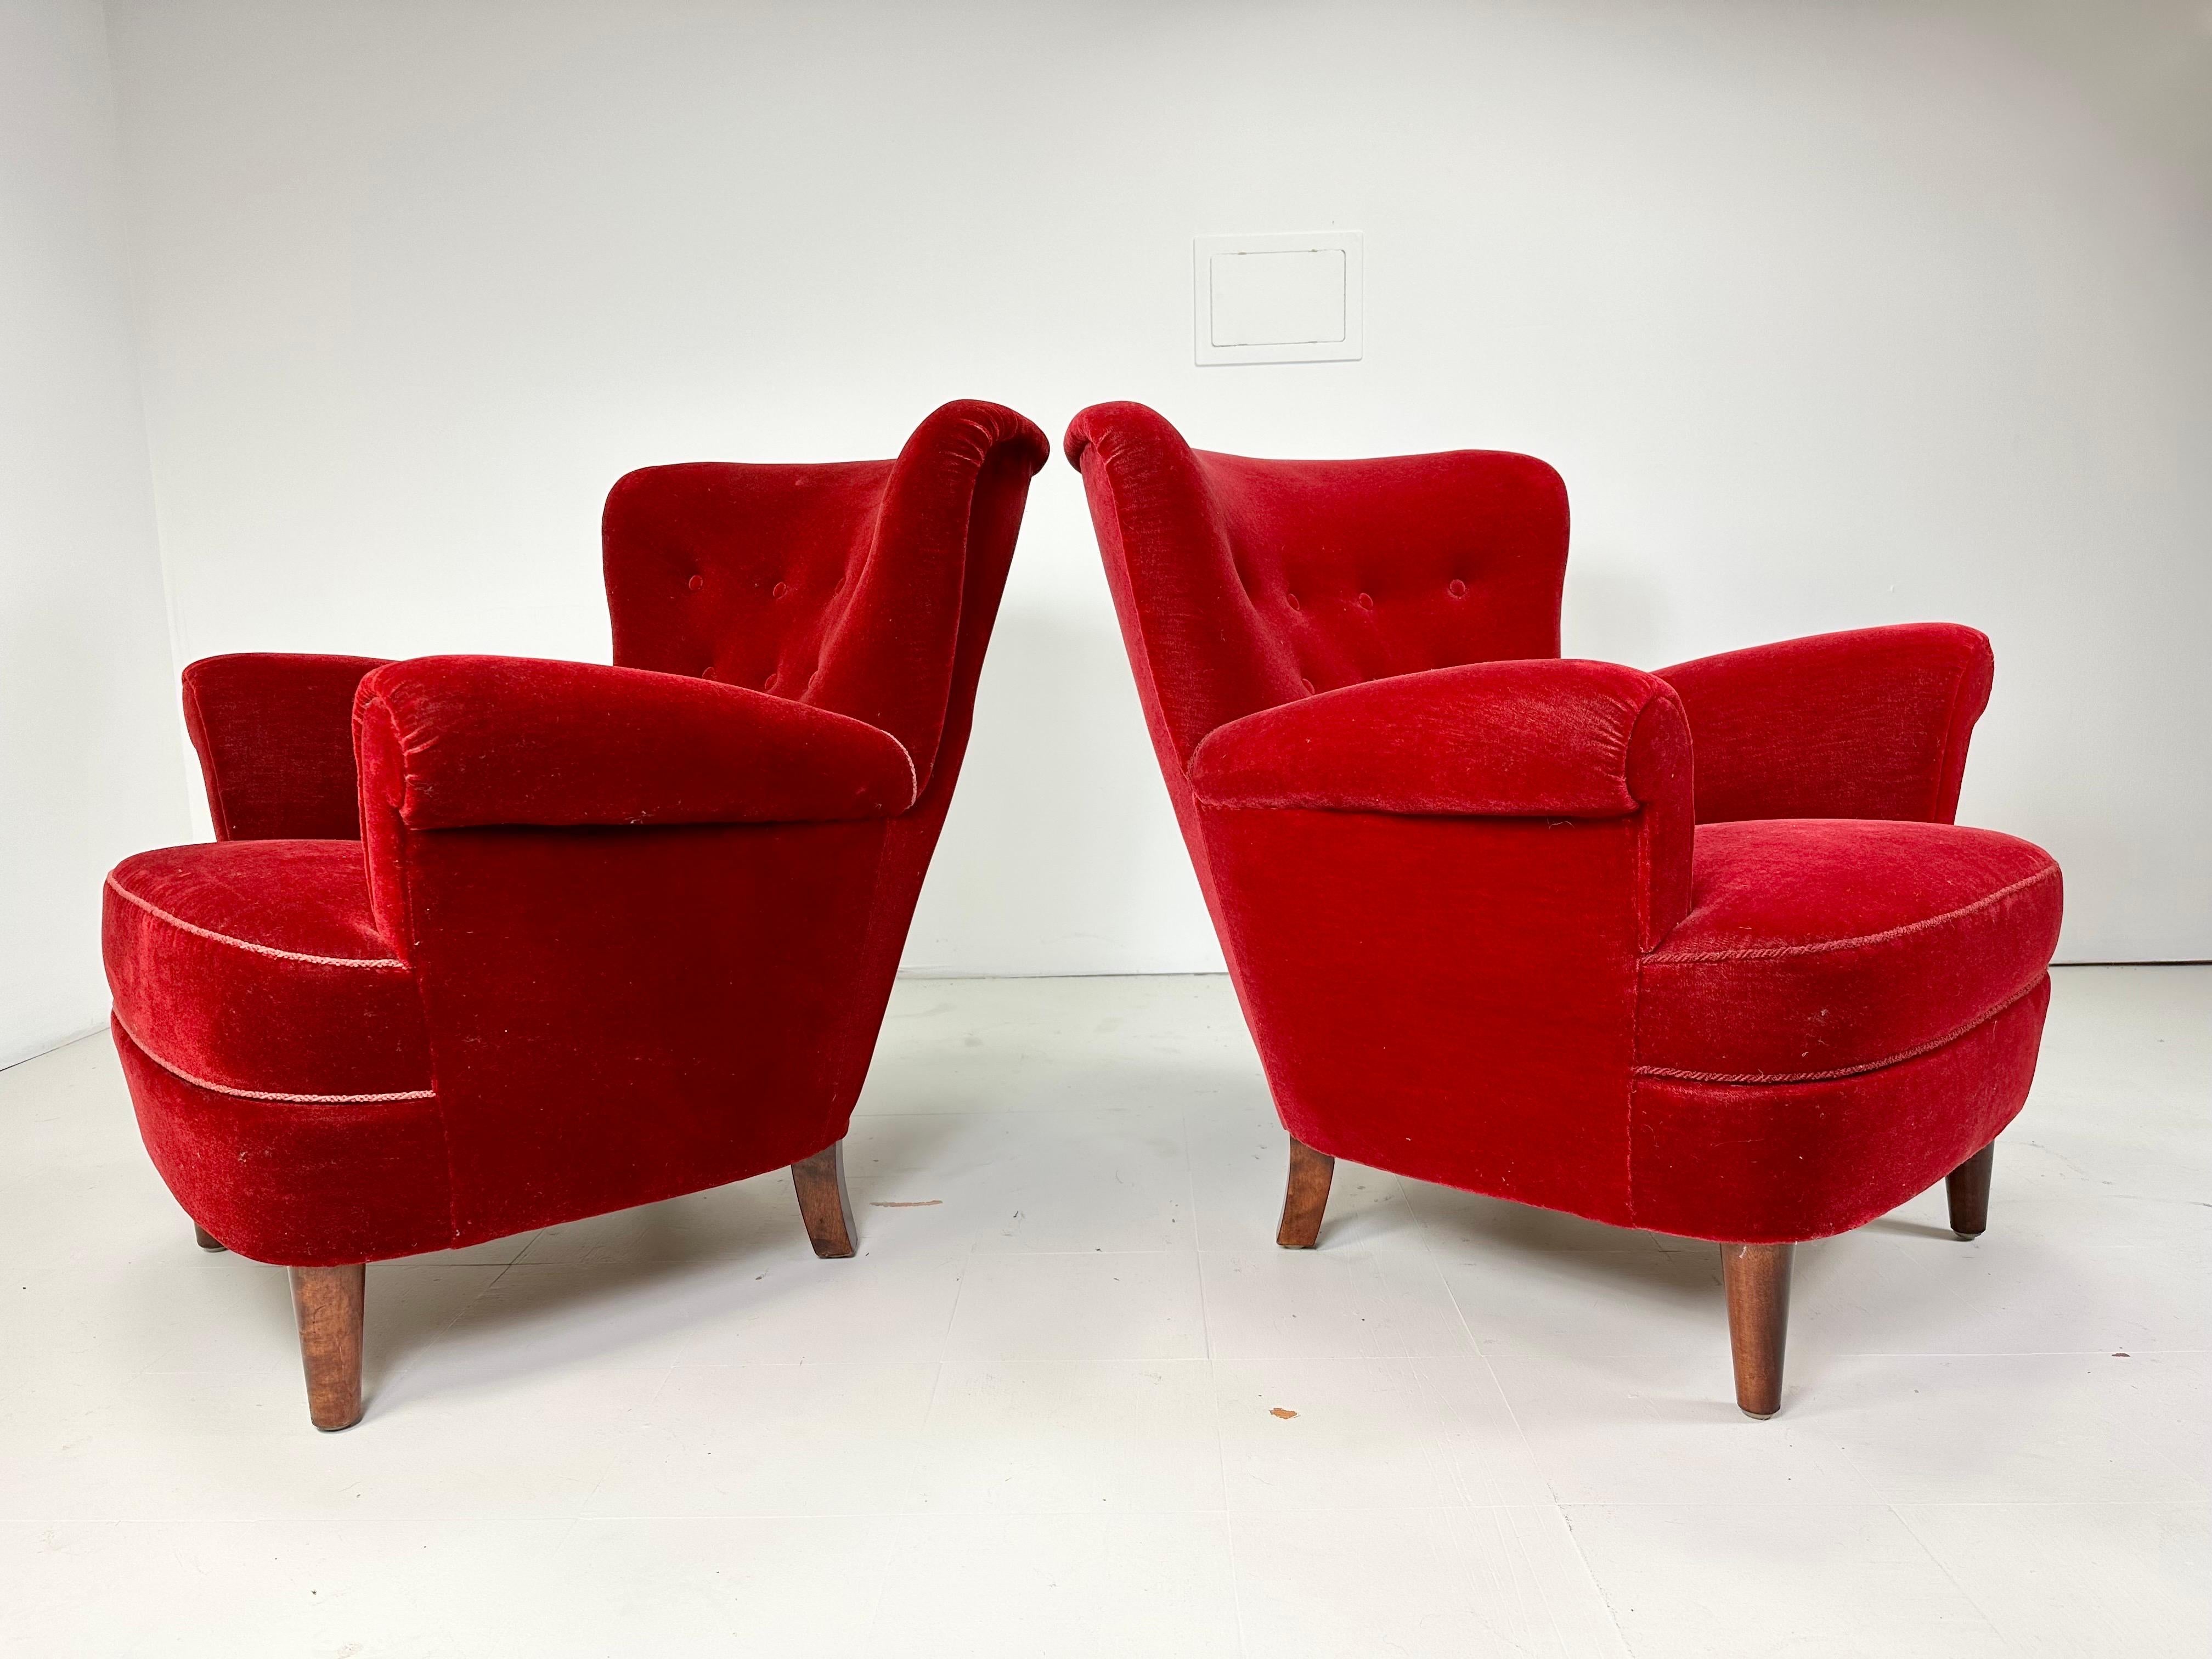 1940’s Red Velvet Danish Lounge Chairs. Stained Birch legs. Buttton Seat Backs. Classic 1940’s Danish Design.

We offer delivery to NYC area for $425